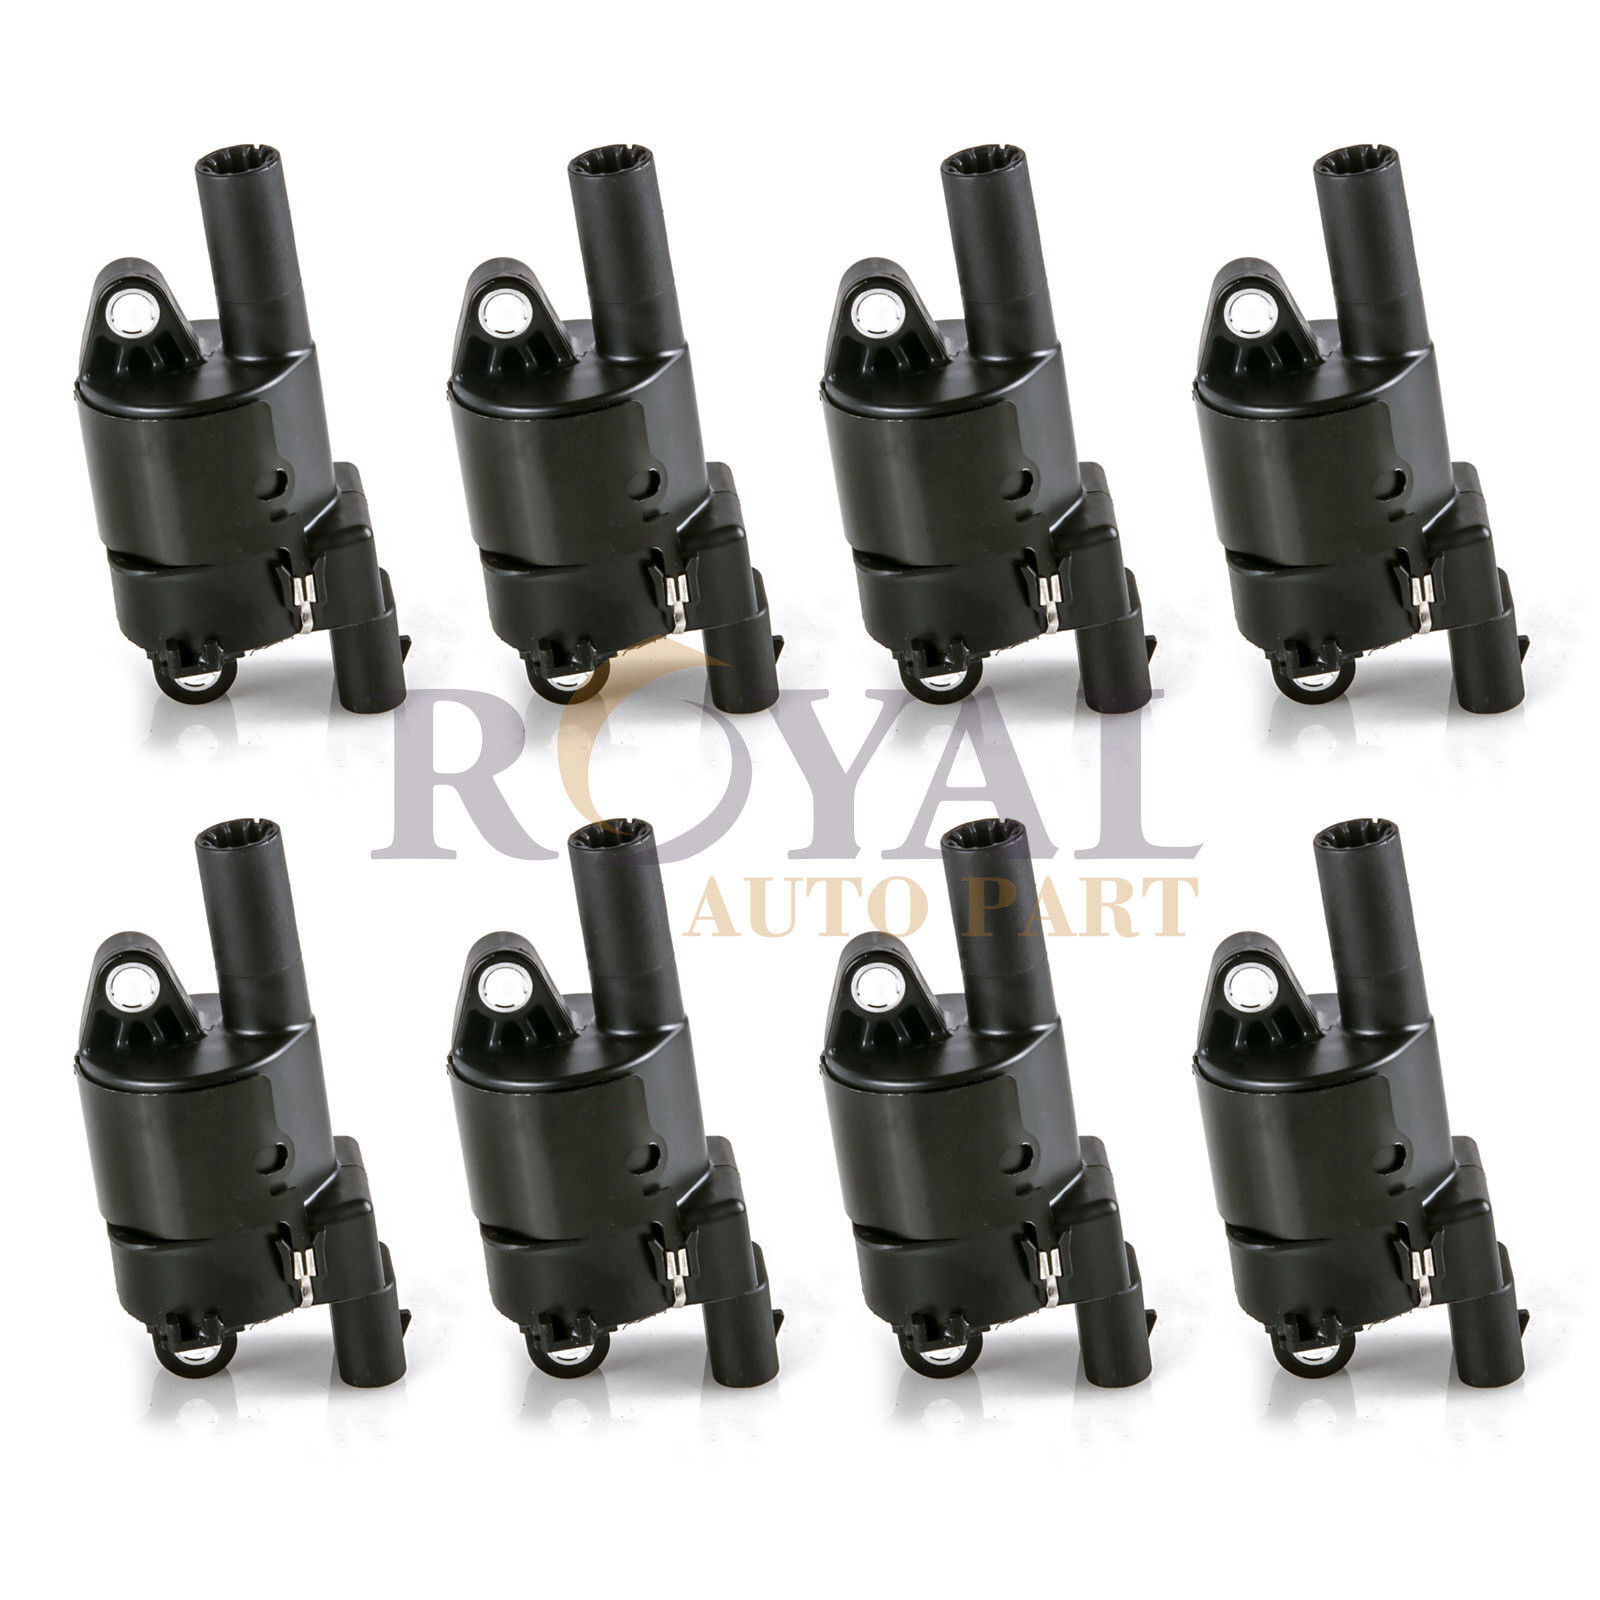 8 UF414 Round Ignition Coil Pack for Chevy Silverado 1500 Impala Tahoe GMC